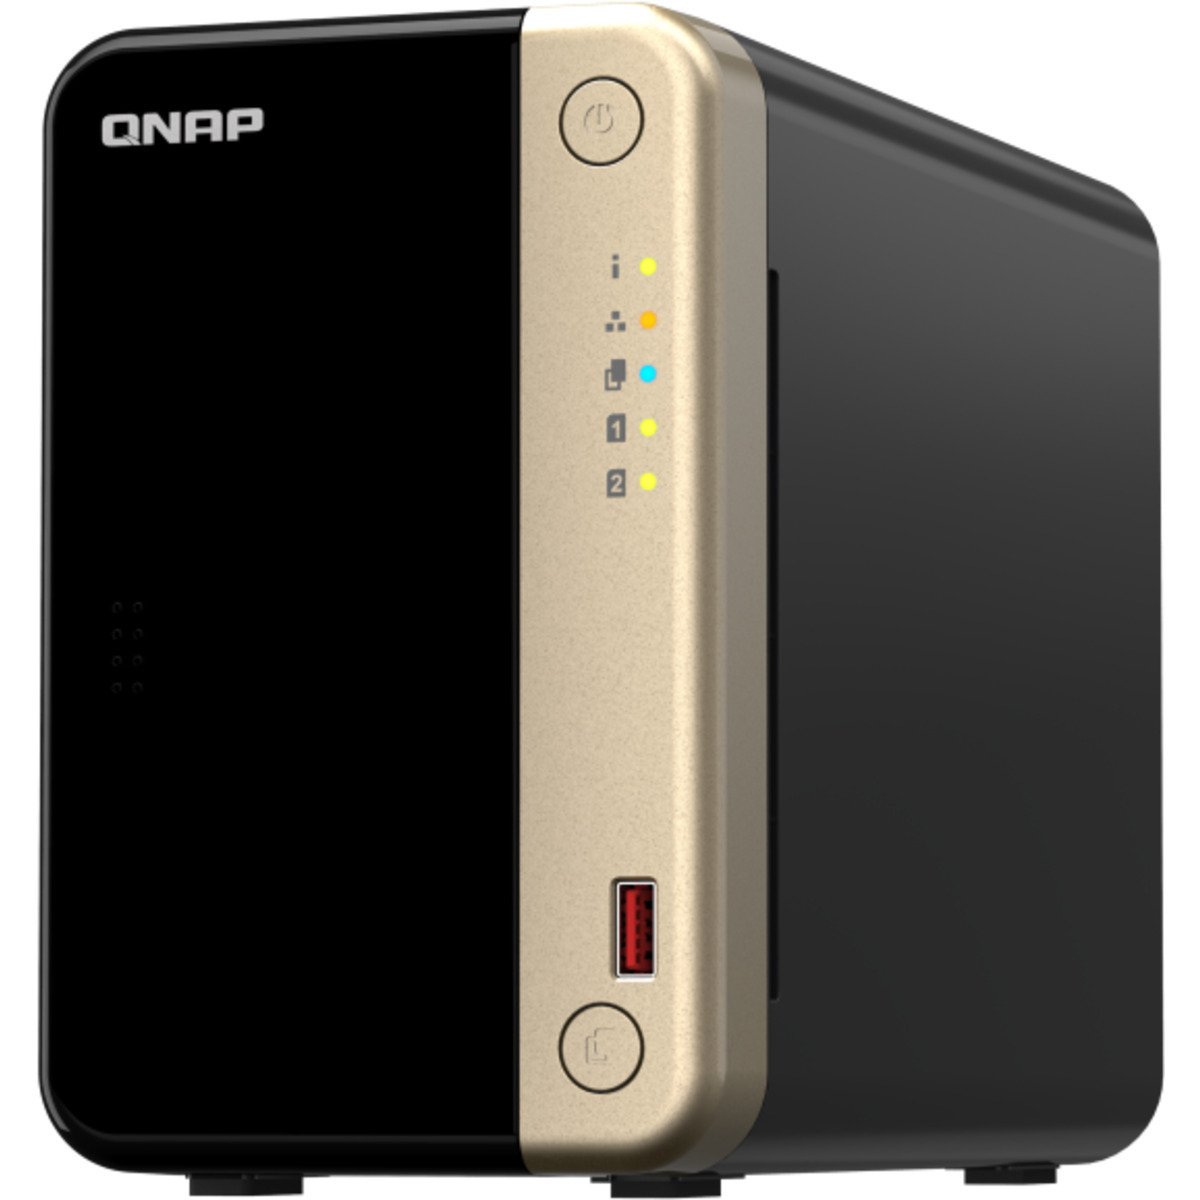 QNAP TS-264 8tb 2-Bay Desktop Multimedia / Power User / Business NAS - Network Attached Storage Device 1x8tb Seagate IronWolf Pro ST8000NT001 3.5 7200rpm SATA 6Gb/s HDD NAS Class Drives Installed - Burn-In Tested - ON SALE TS-264